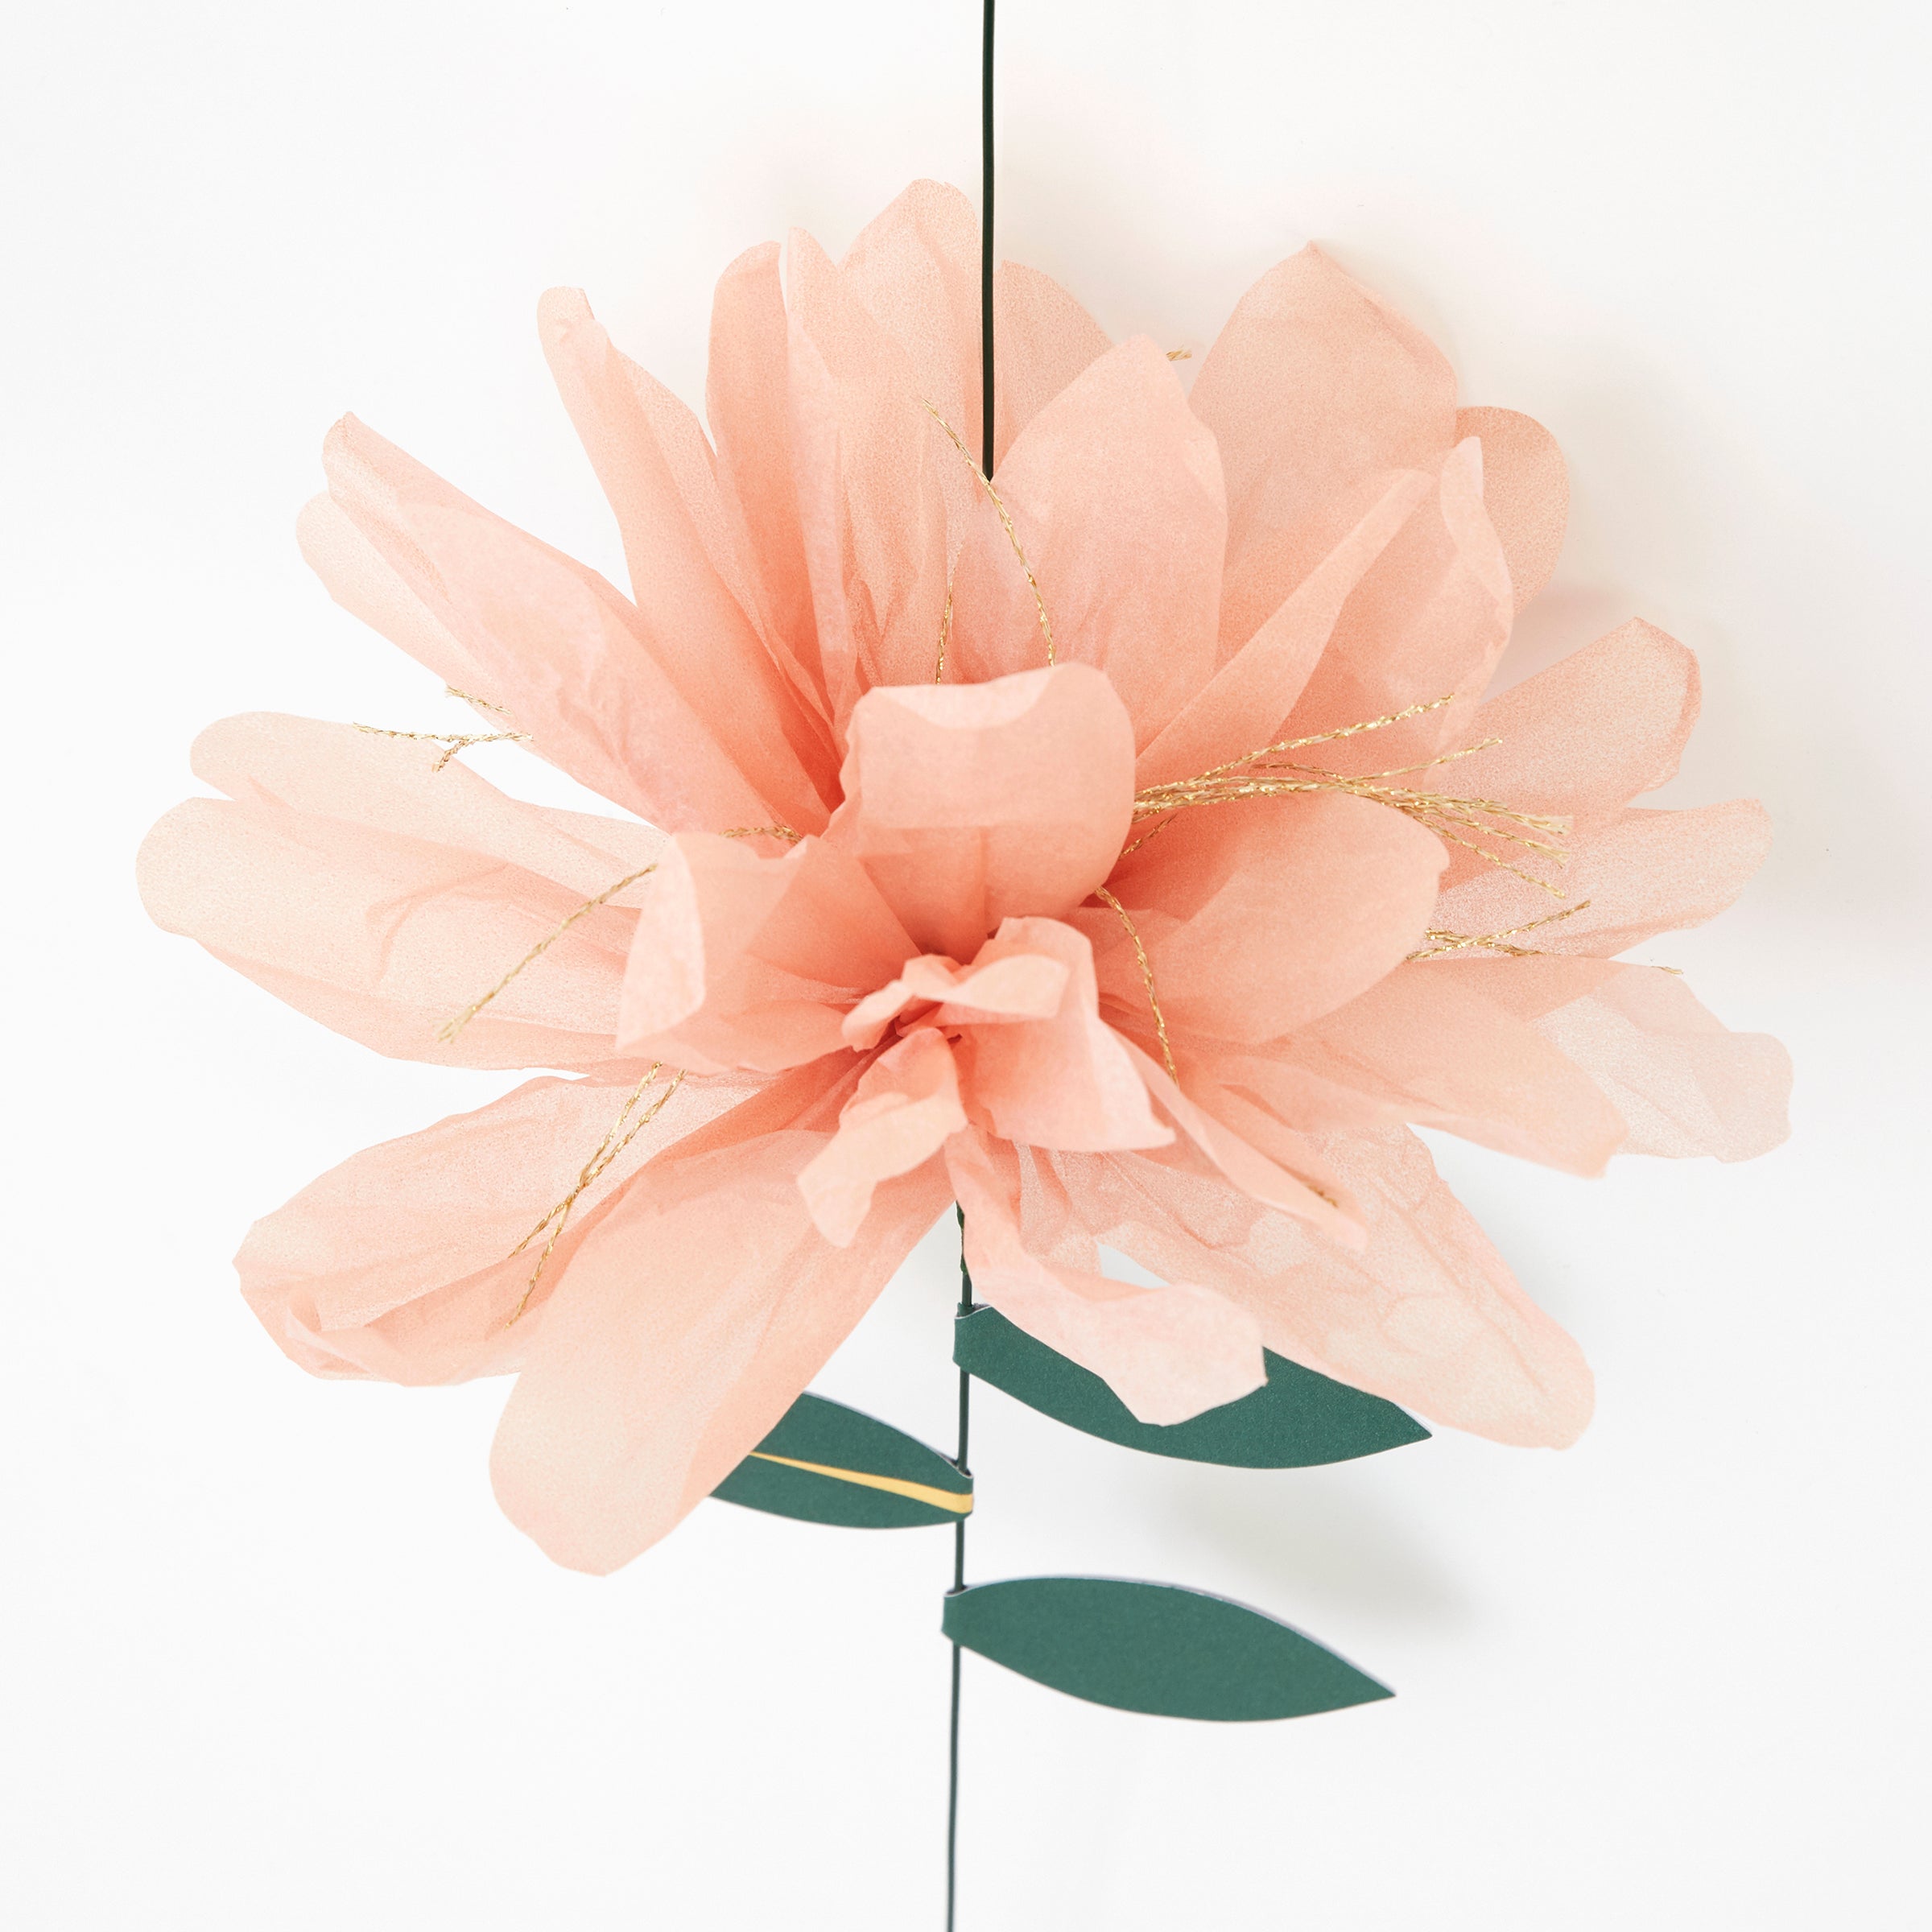 3D Large Paper Flowers Wall Backdrop for Nursery Decor, Giant Paper Flowers  for Garden Party Decor, Green and Peach Paper Wall Art 